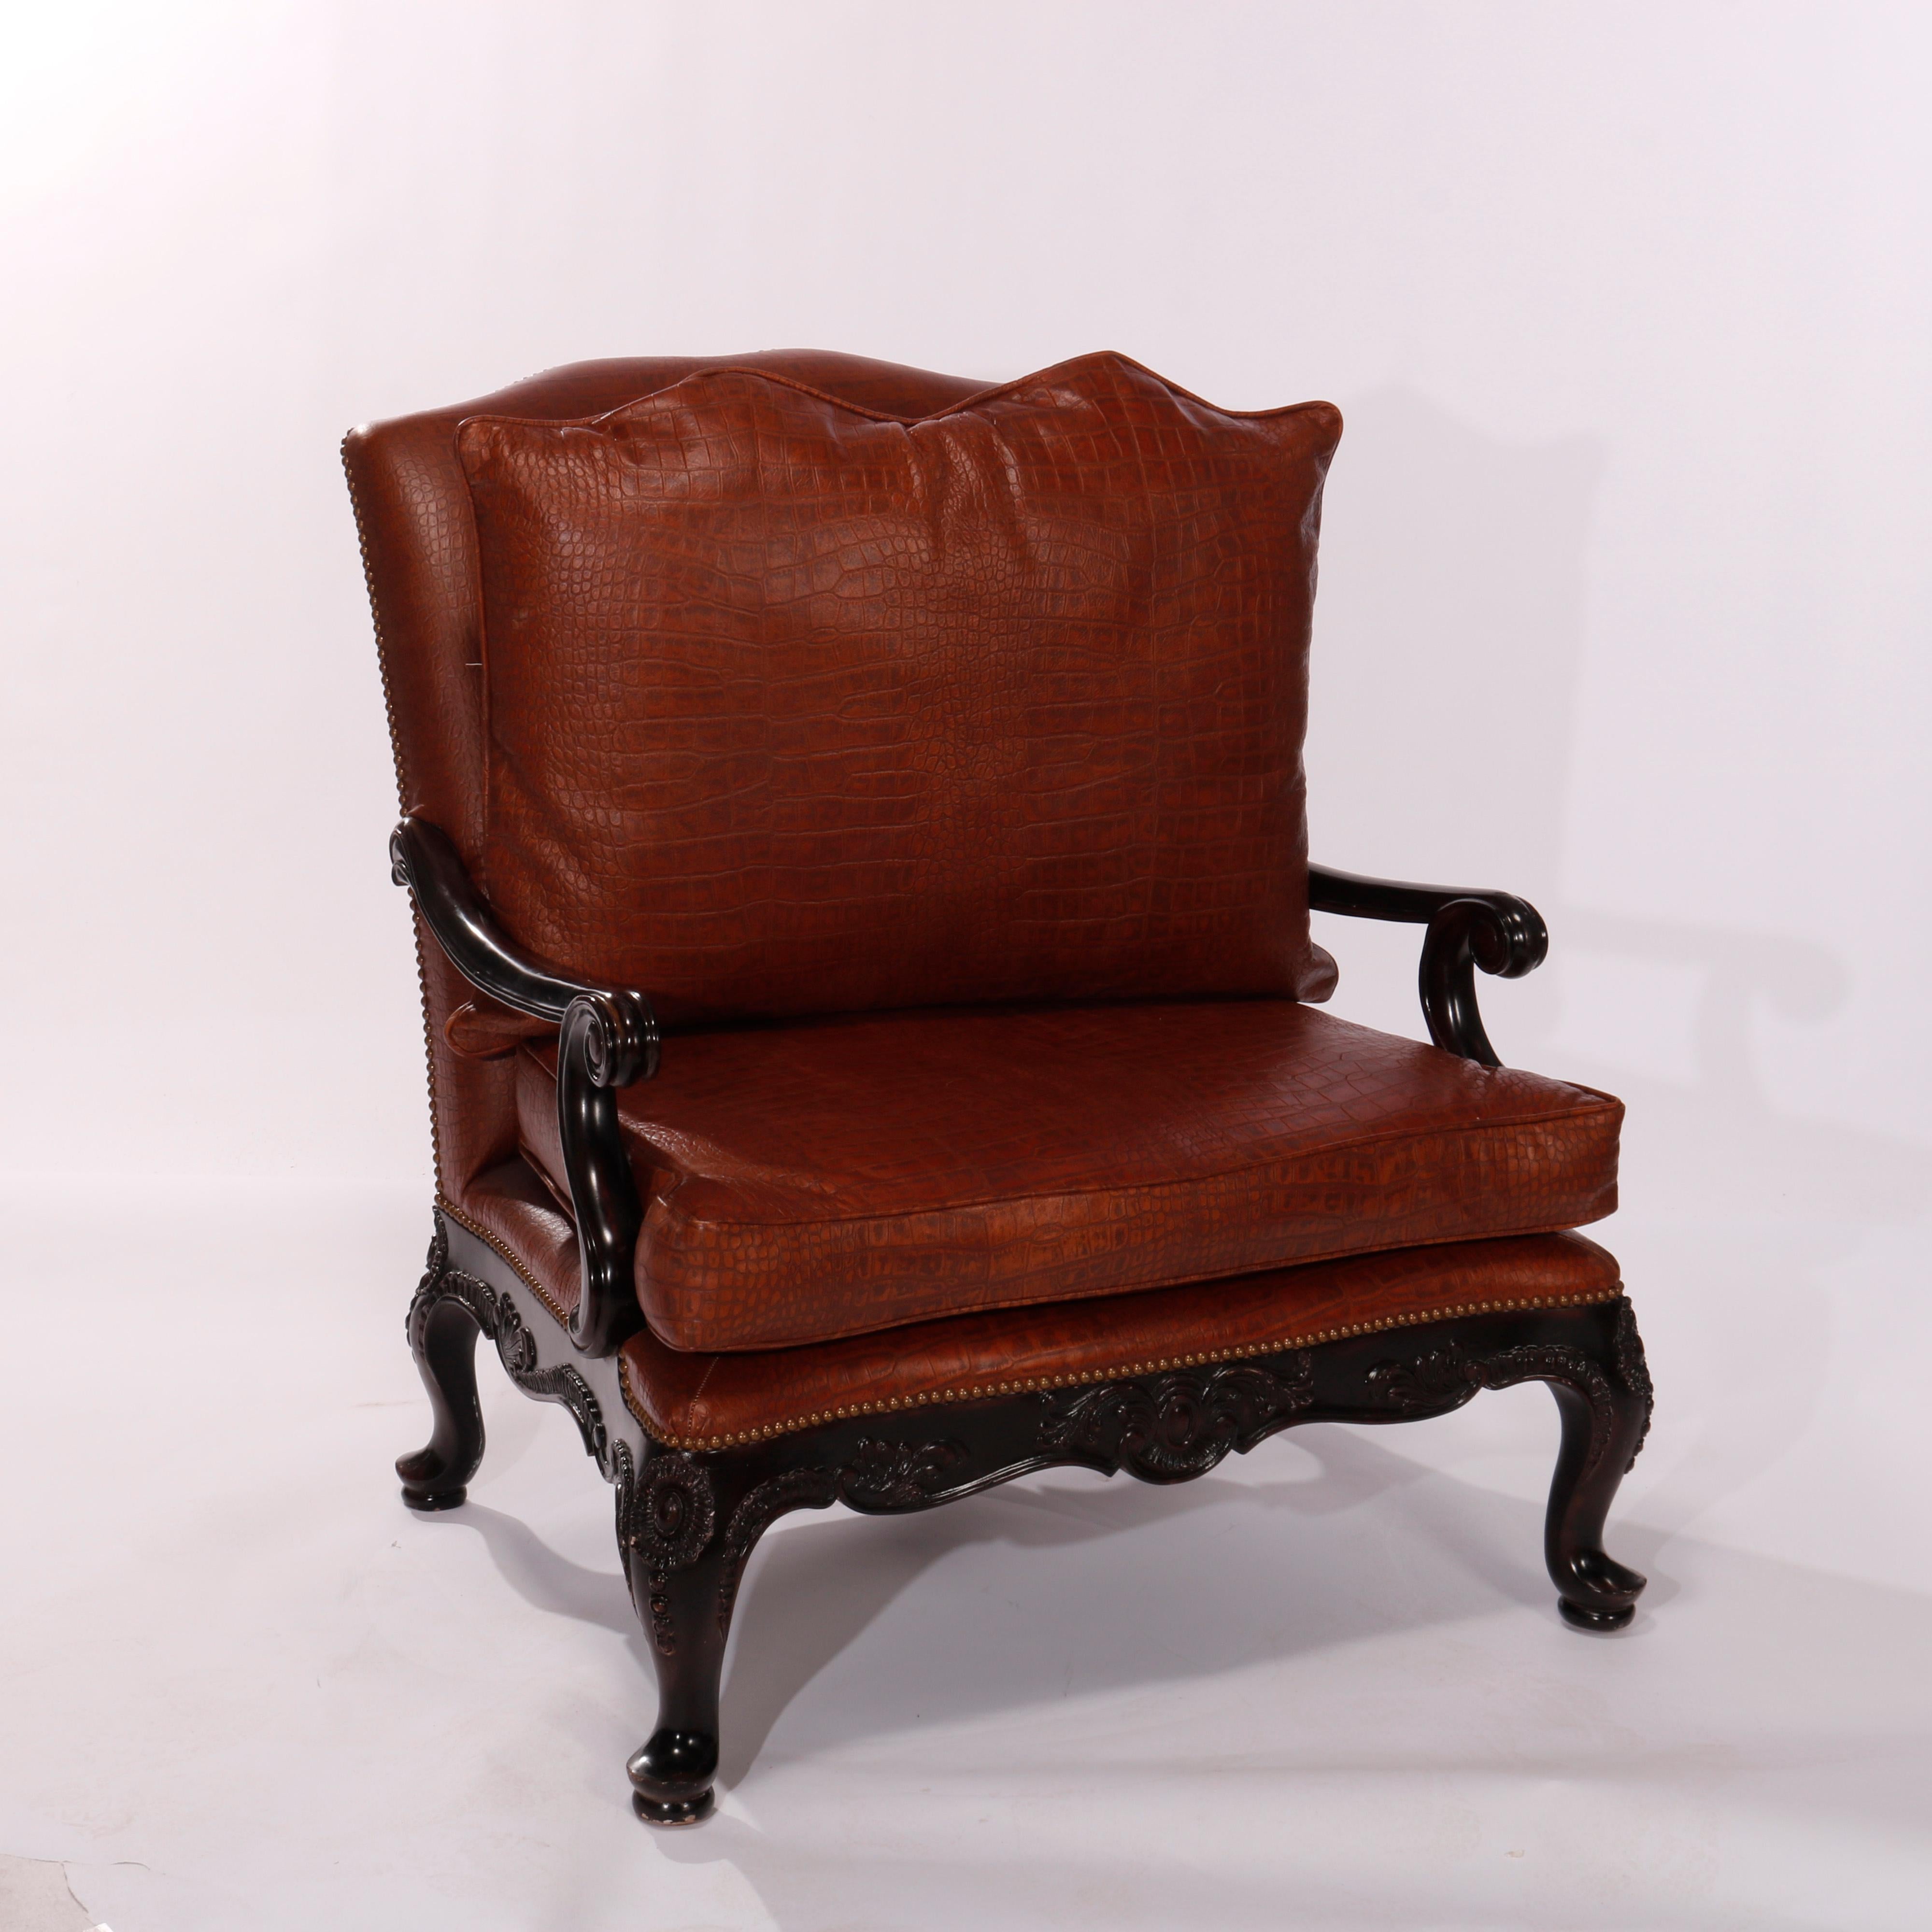 A large armchair by Maitland Smith offers leather upholstery in alligator skin patter with shaped back over walnut frame raised on carved cabriole legs, maker label as photographed, 20th century.

Measures - 41.5''H X 38.5''W X 39.75''D; seat height